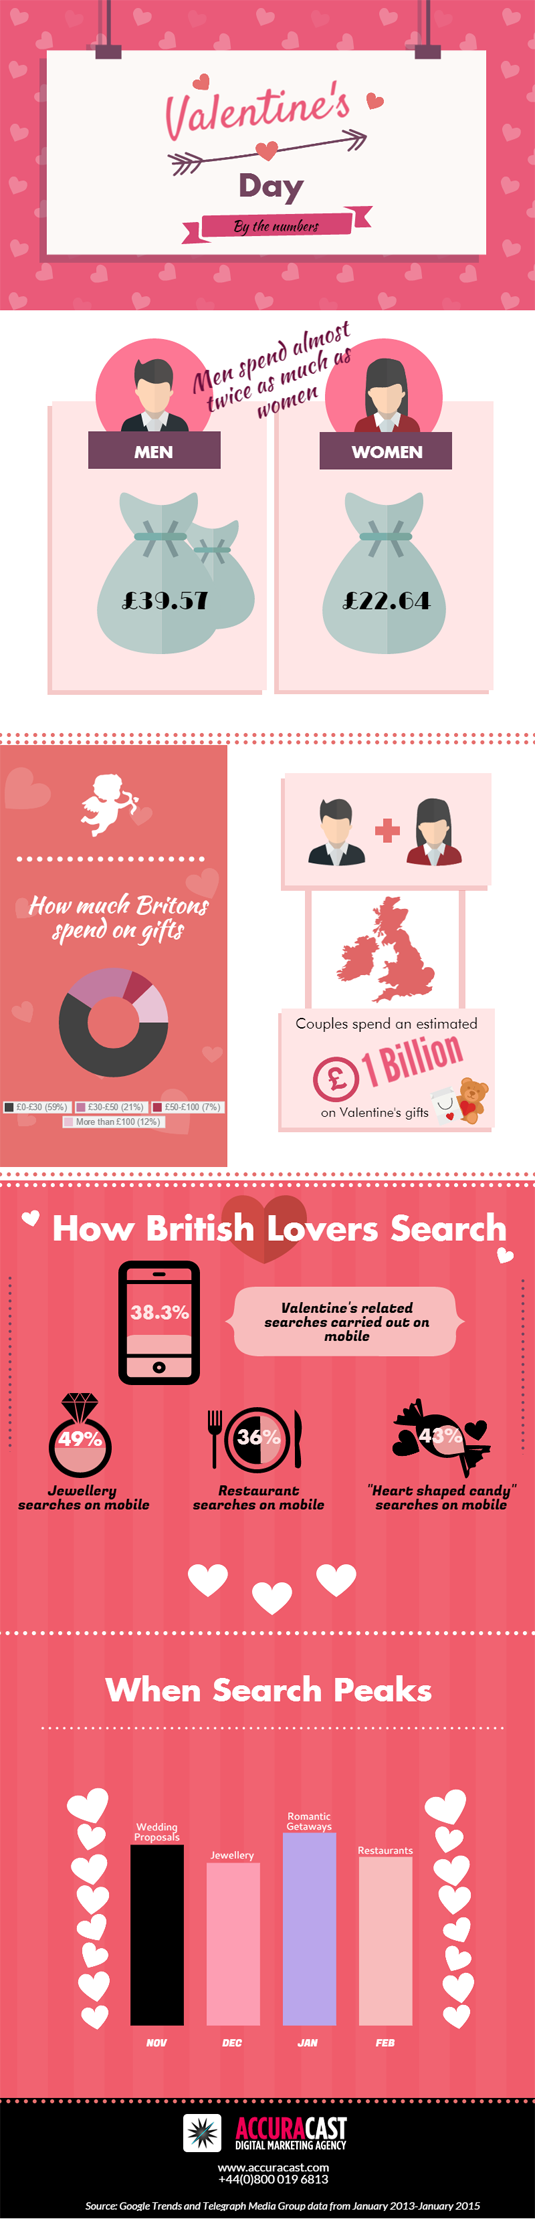 Valentine's Day by the Numbers - Infographic by AccuraCast